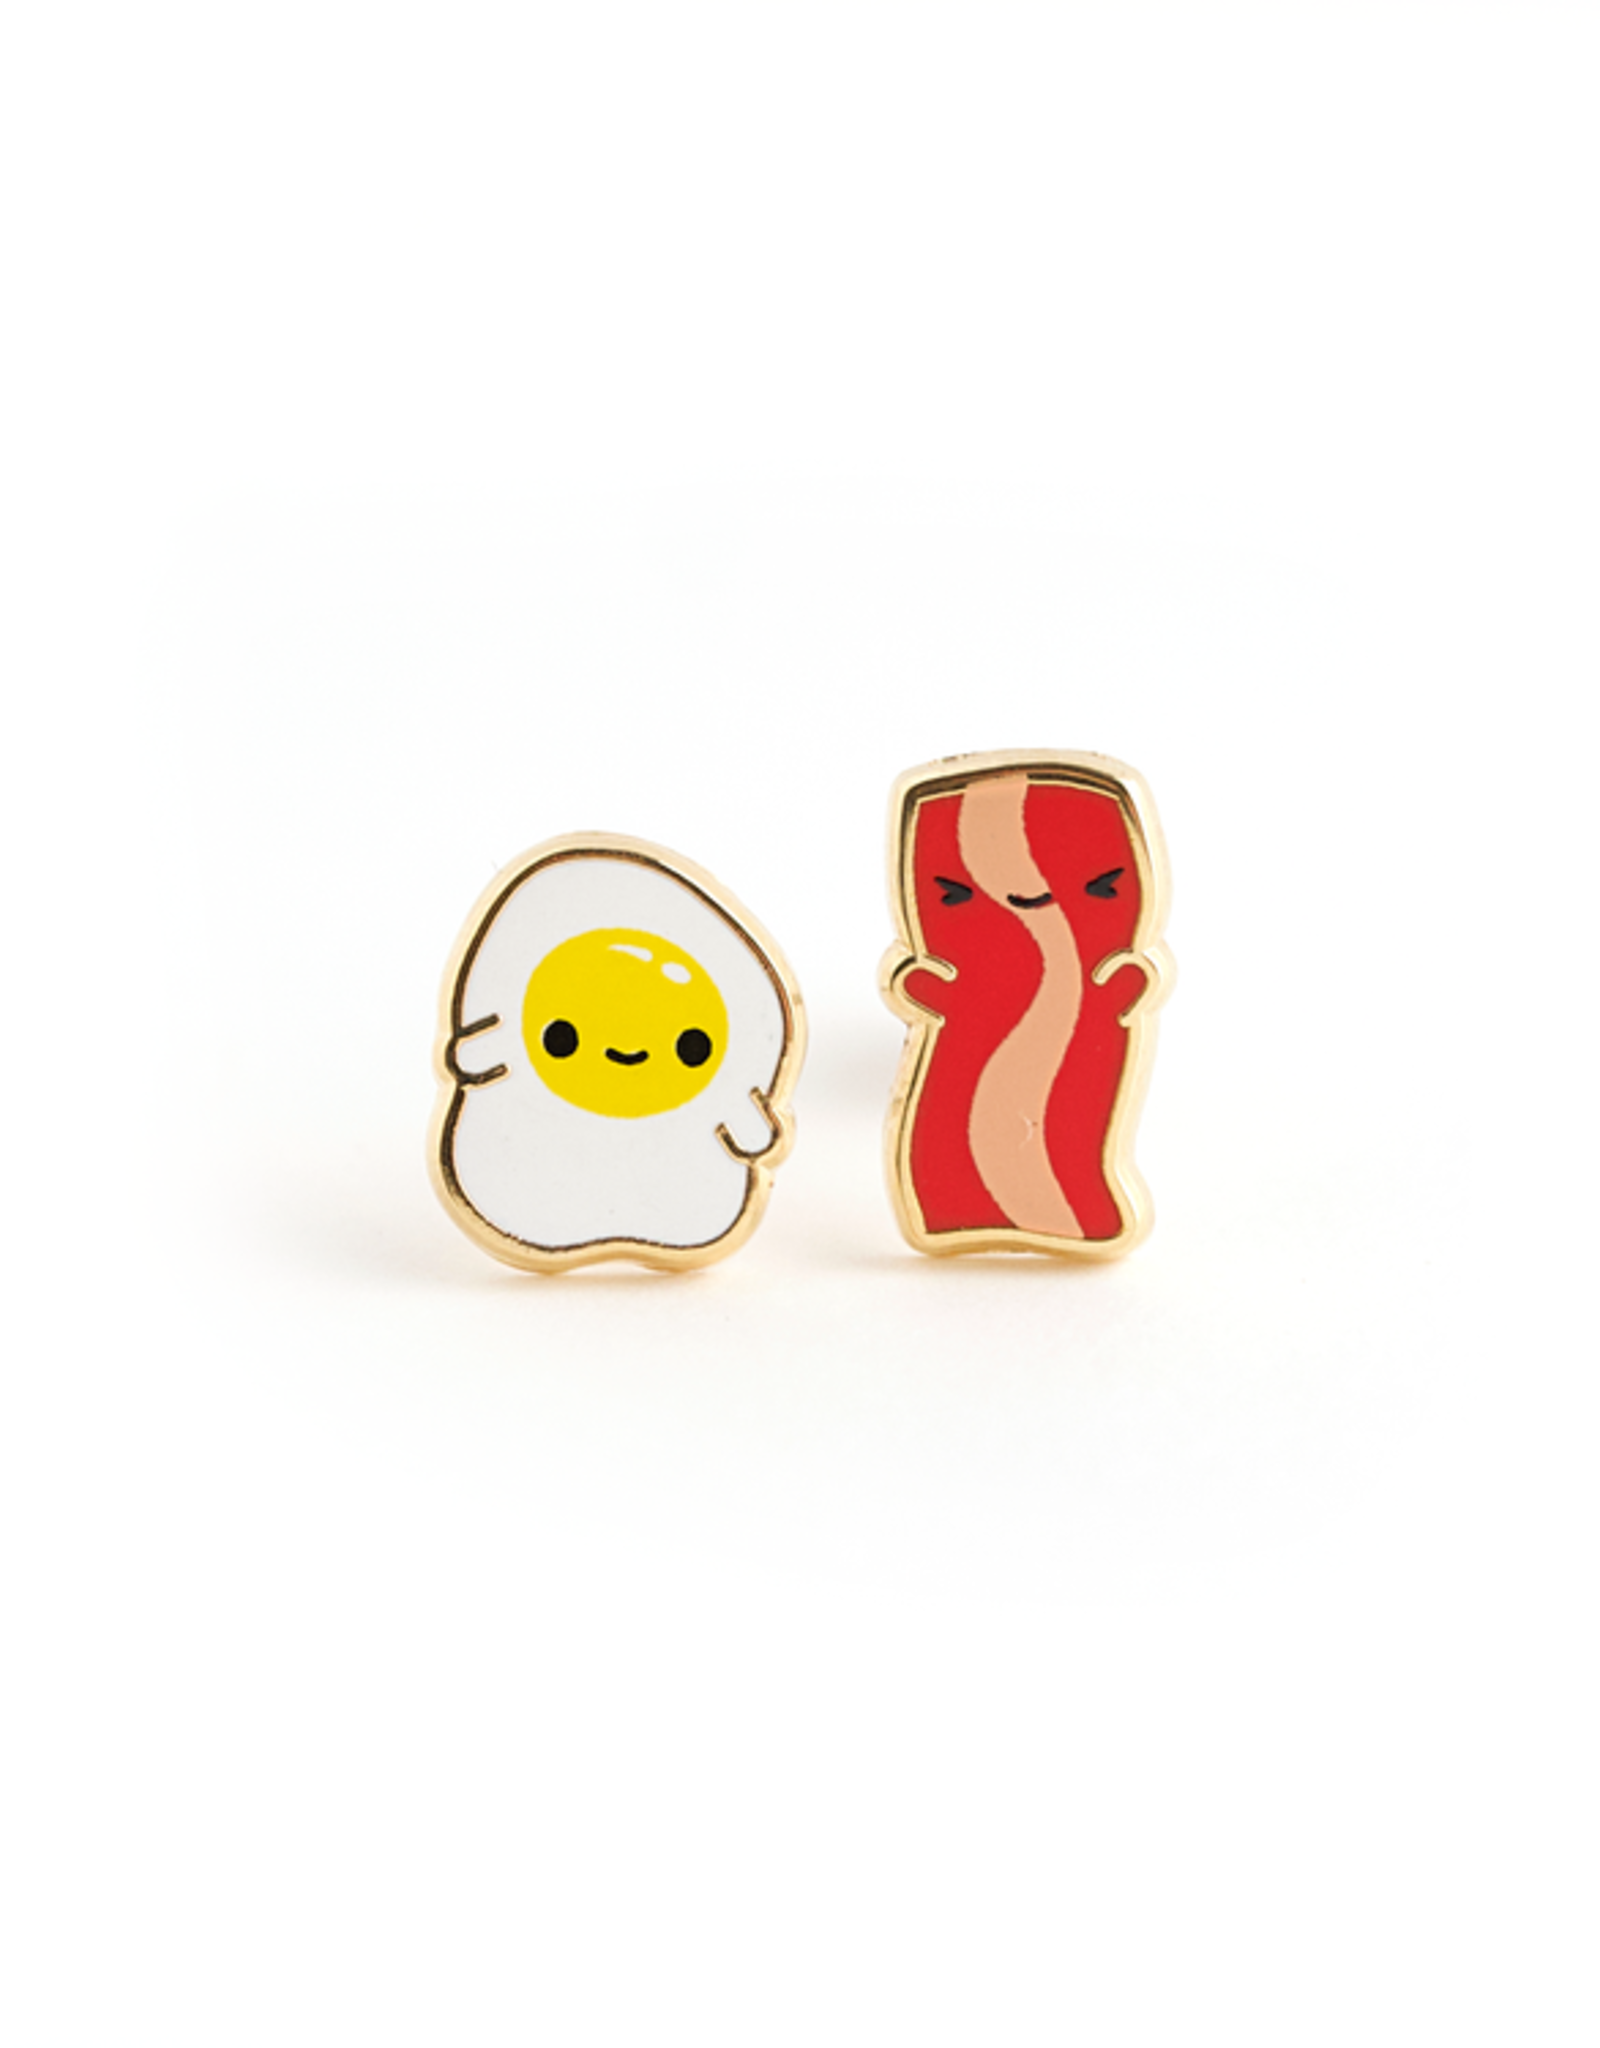 Lux Cups Creative Earrings - Stud: Lux Cups Eggs & Bacon